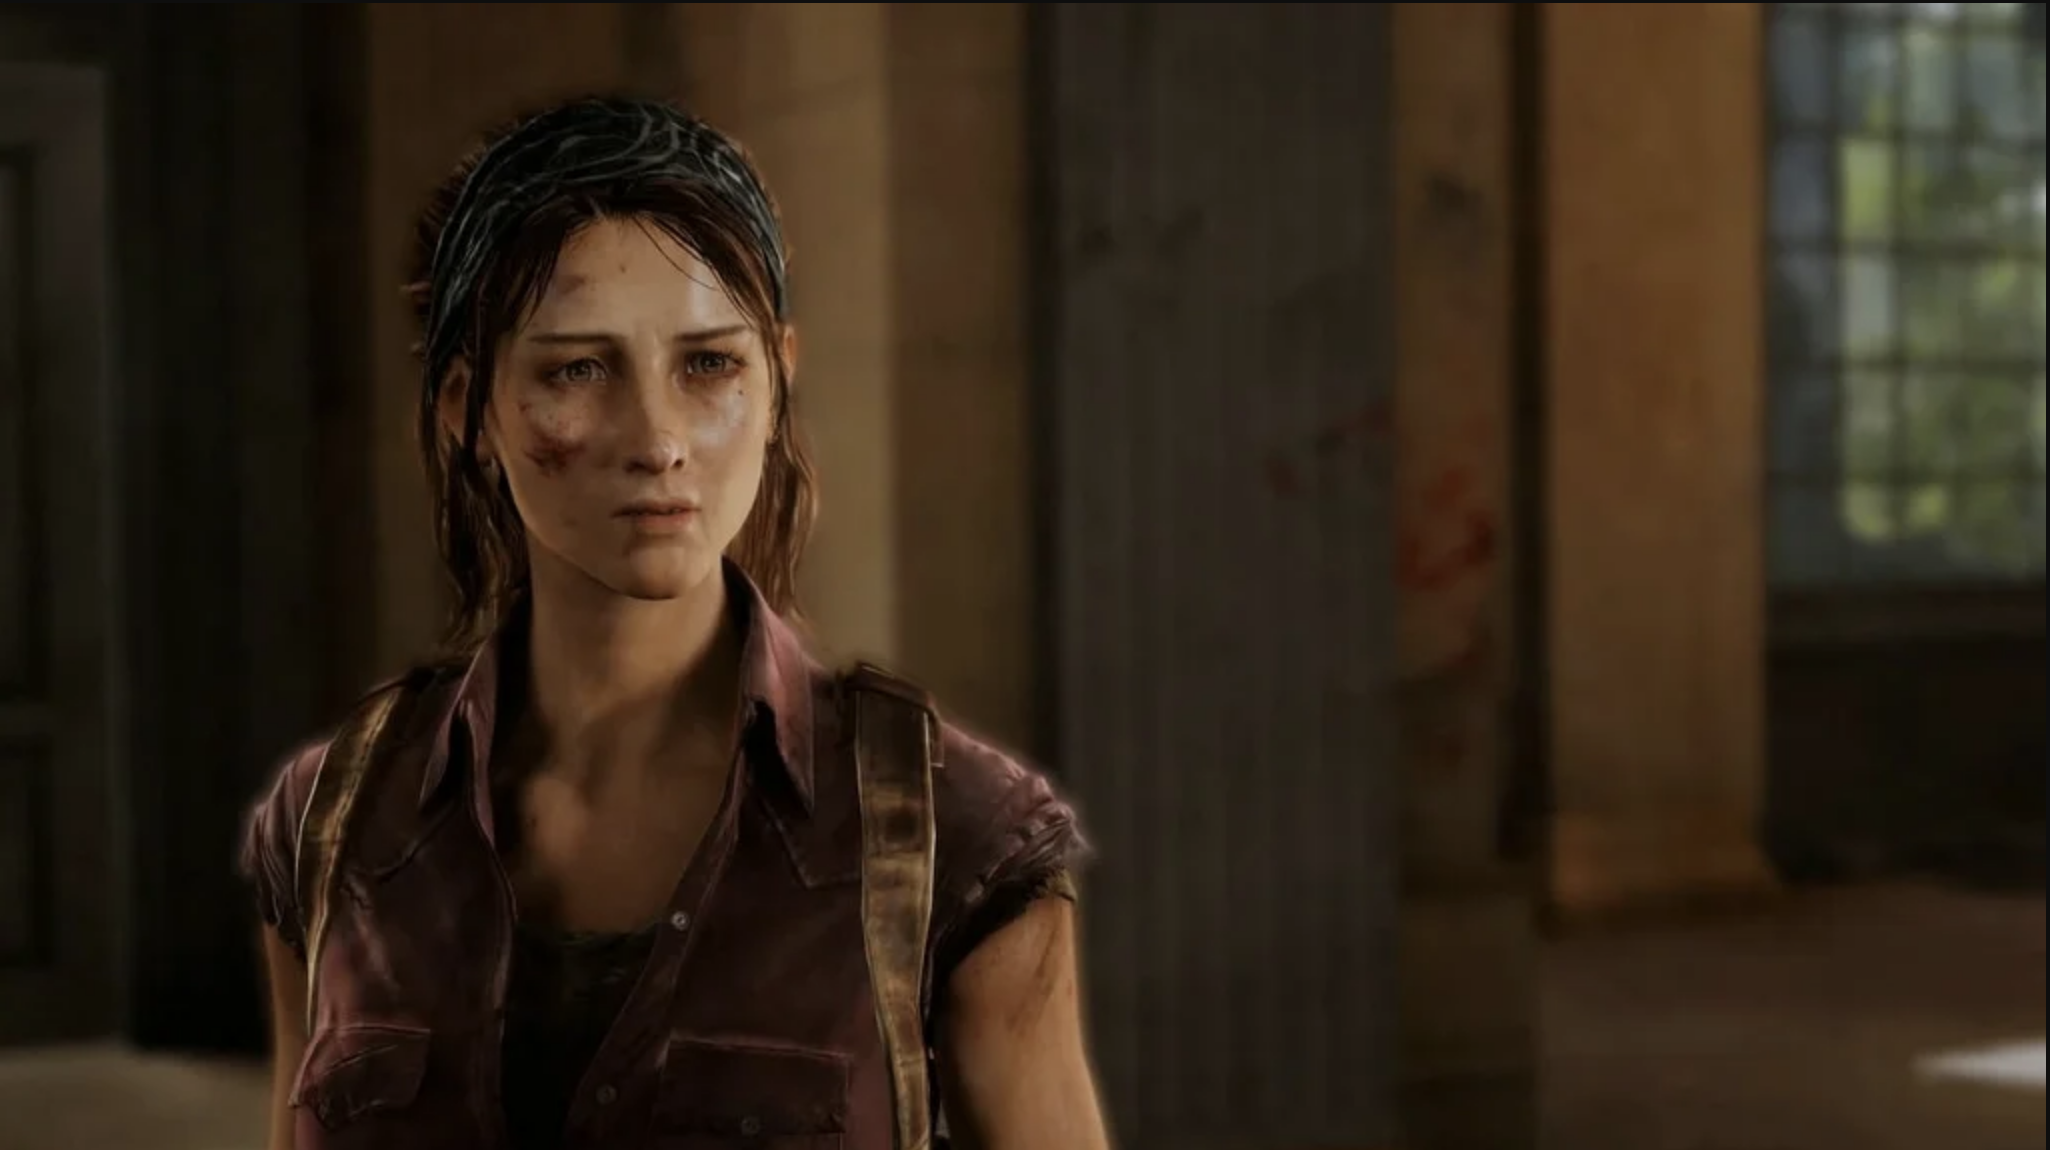 Tess in The Last Of Us video game